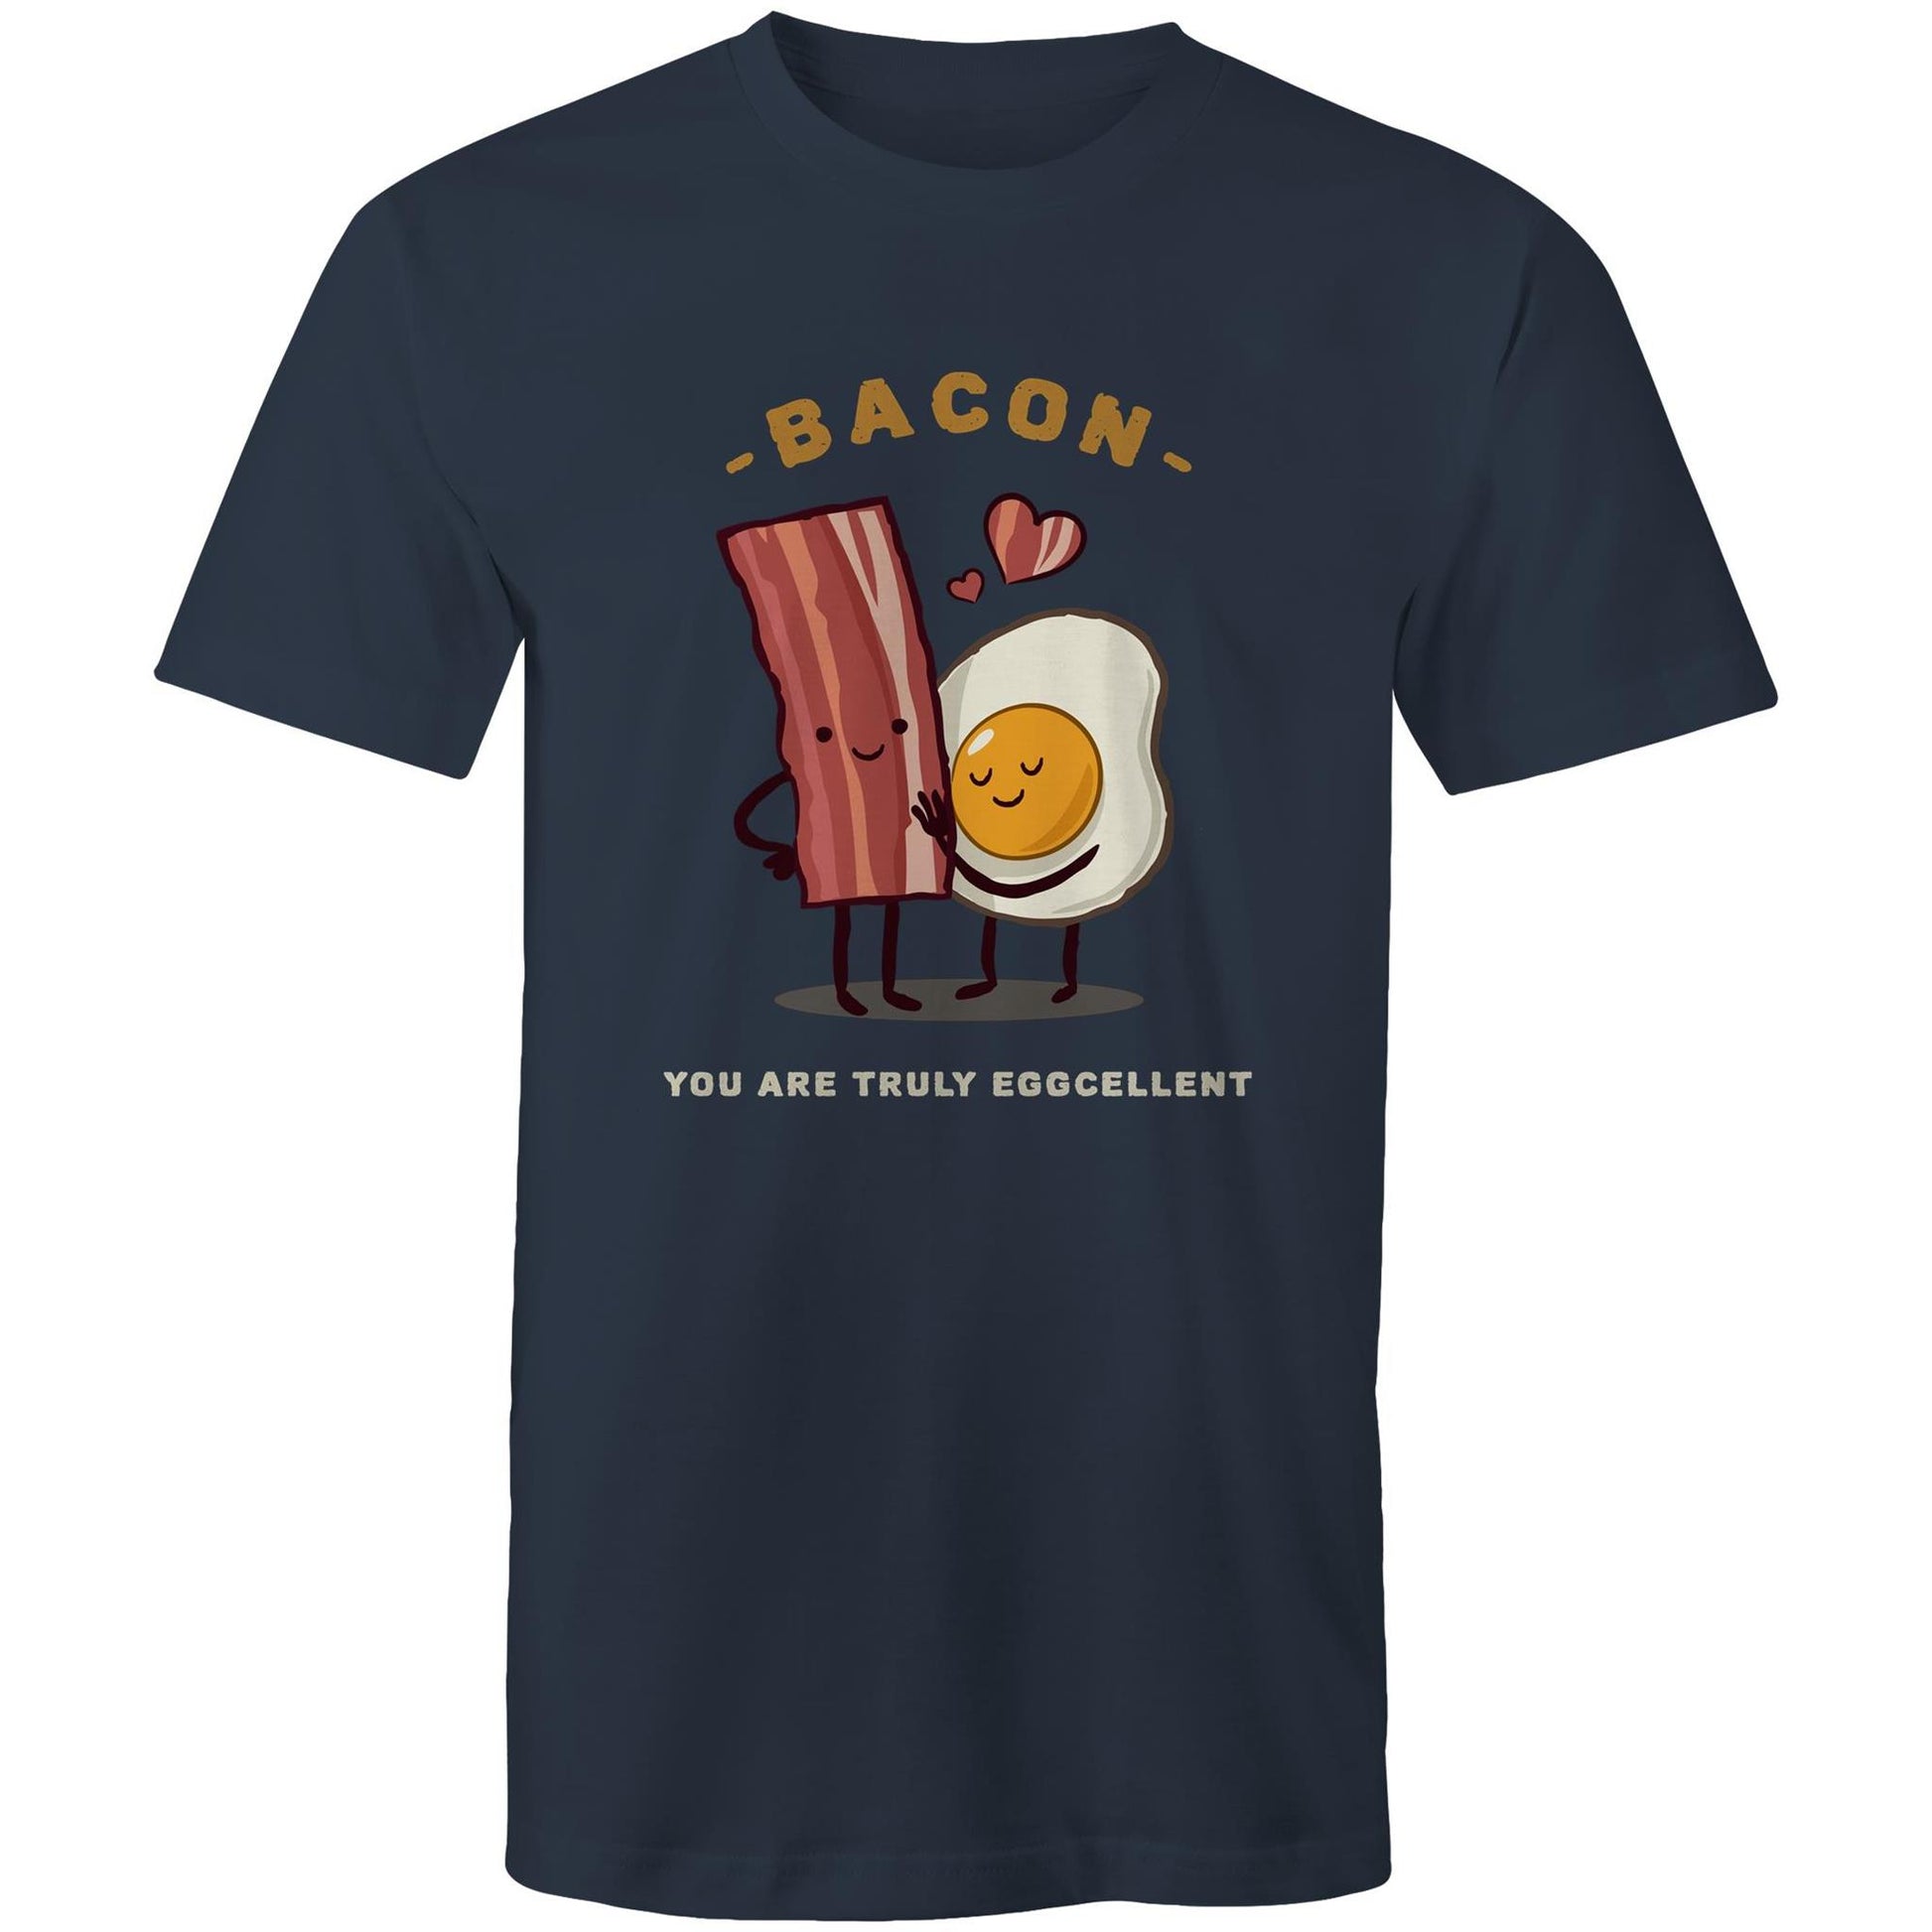 Bacon, You Are Truly Eggcellent - Mens T-Shirt Navy Mens T-shirt Food